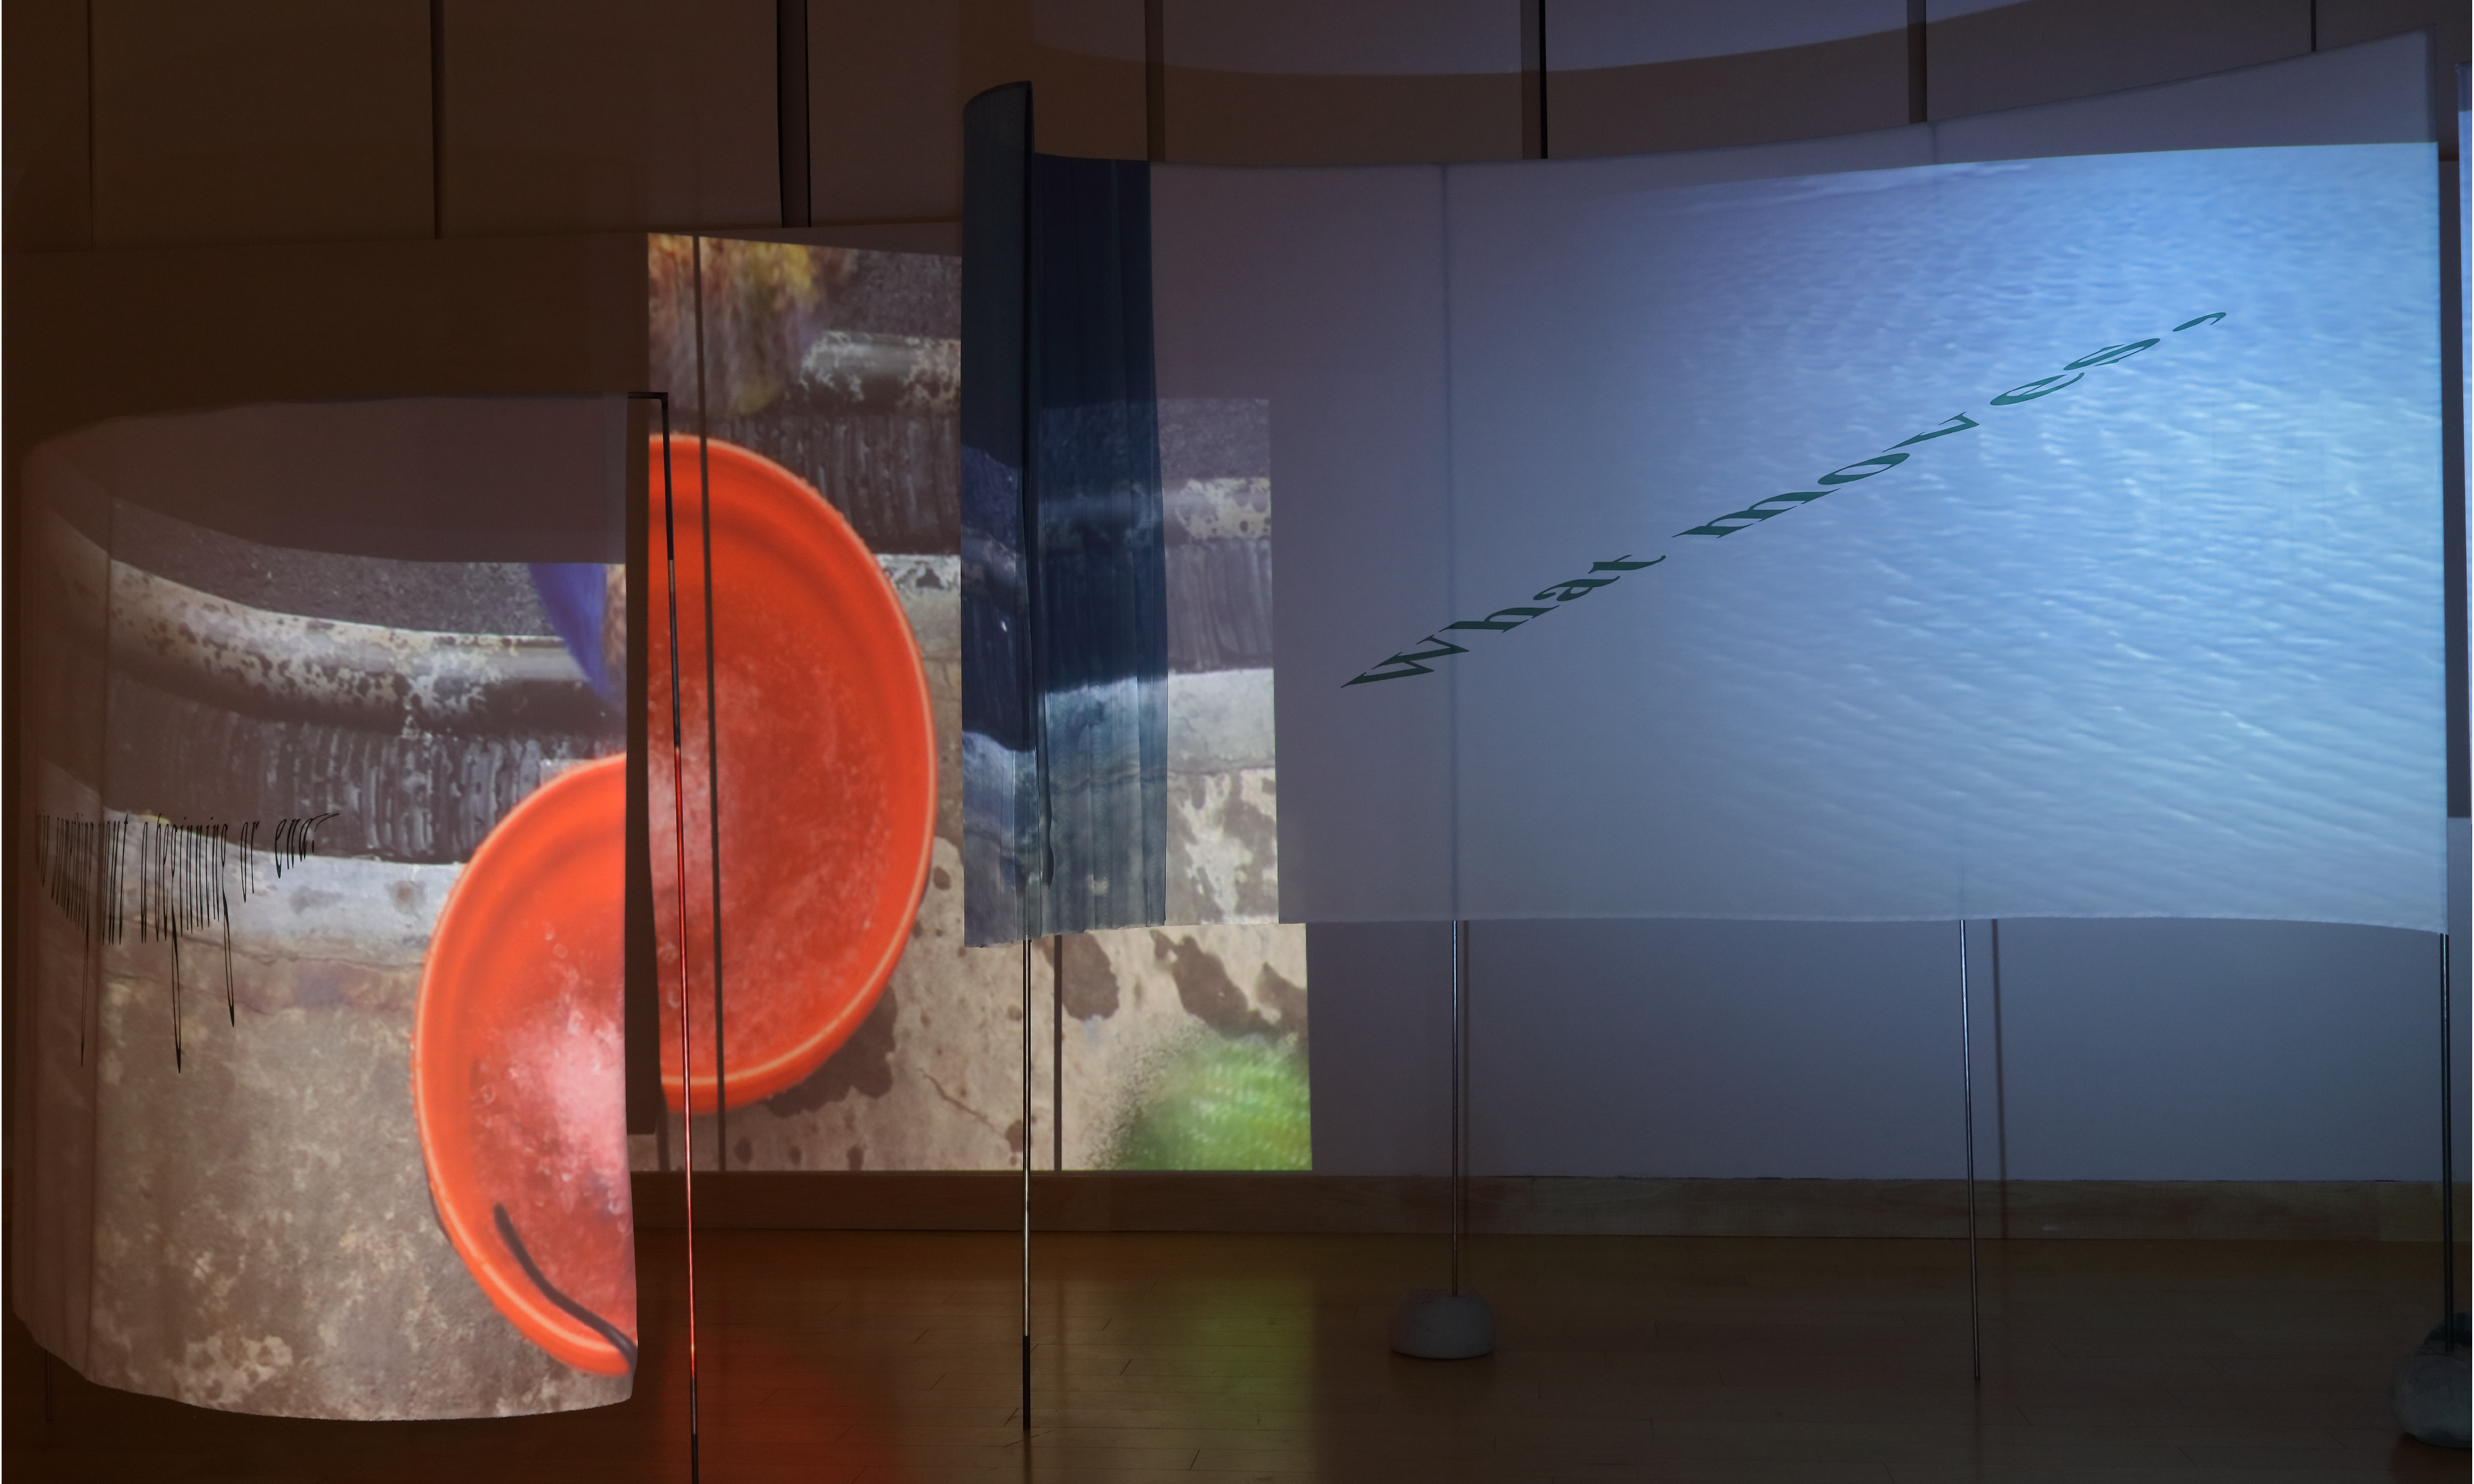 A projection on the front gallery wall. A picture of a red bowl on a sidewalk and a projection with text that reads "what moves,"